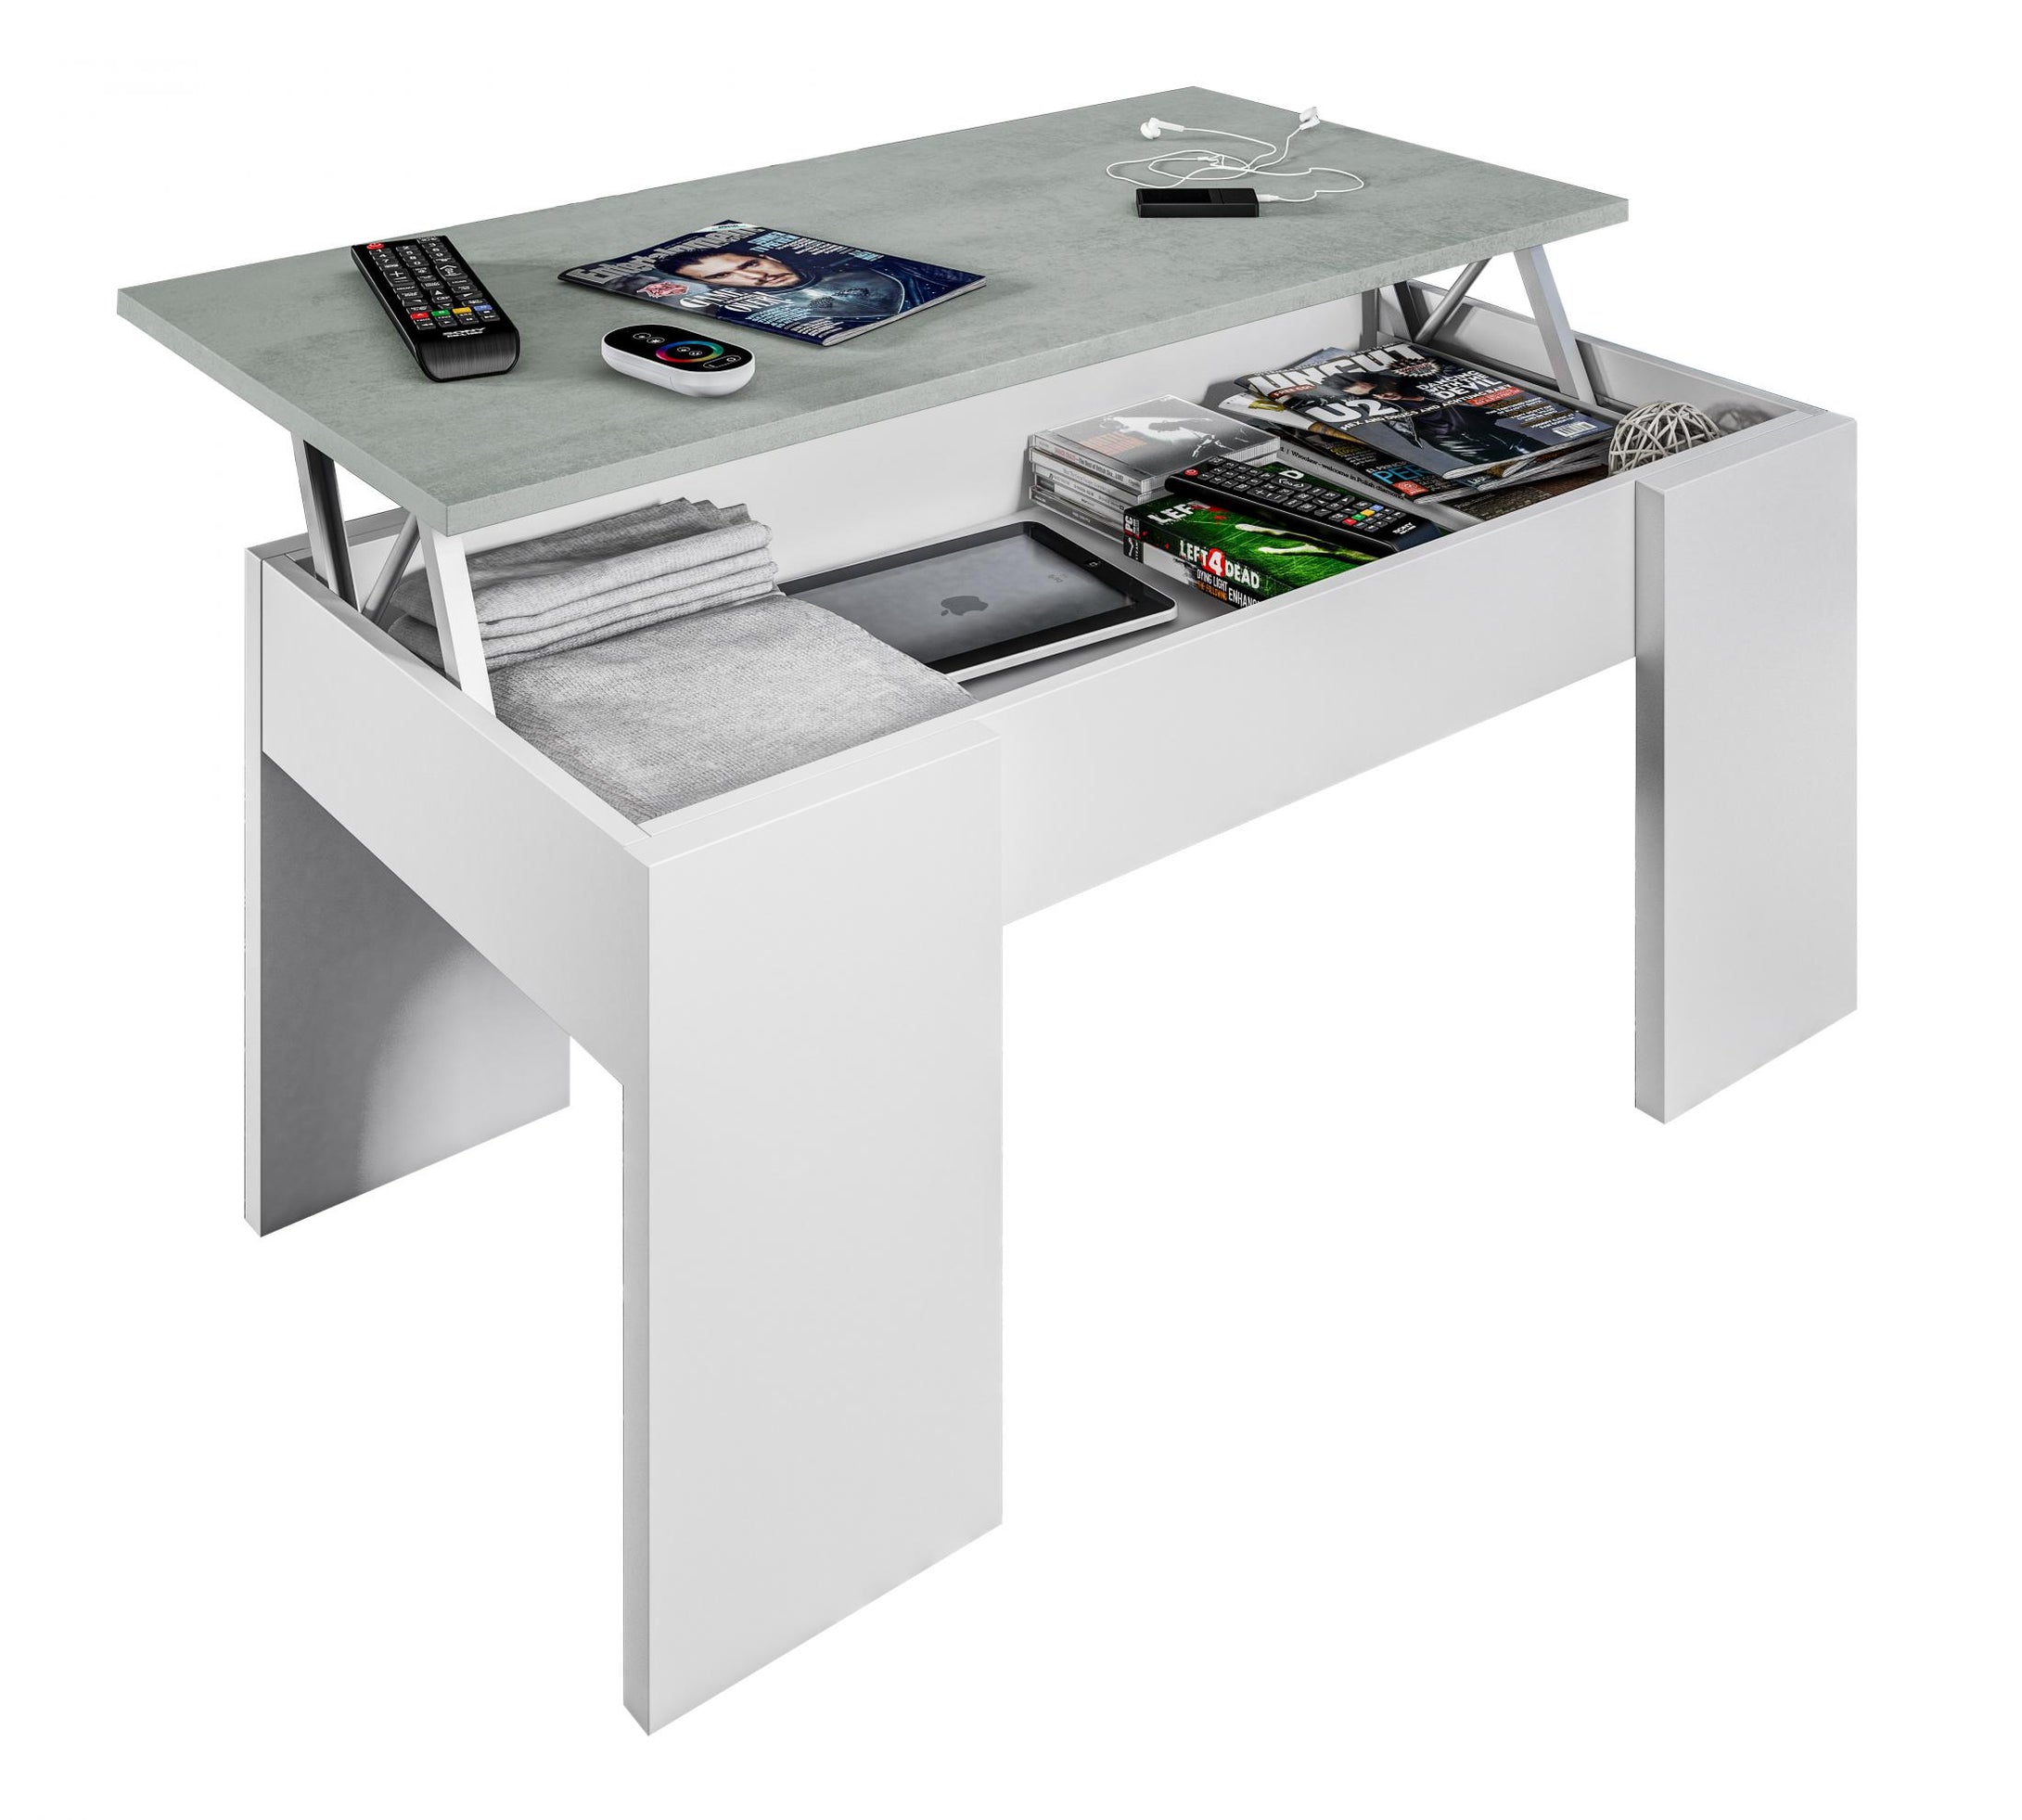 Epping Coffee Table Lift-Up White & Concrete 0L1640A